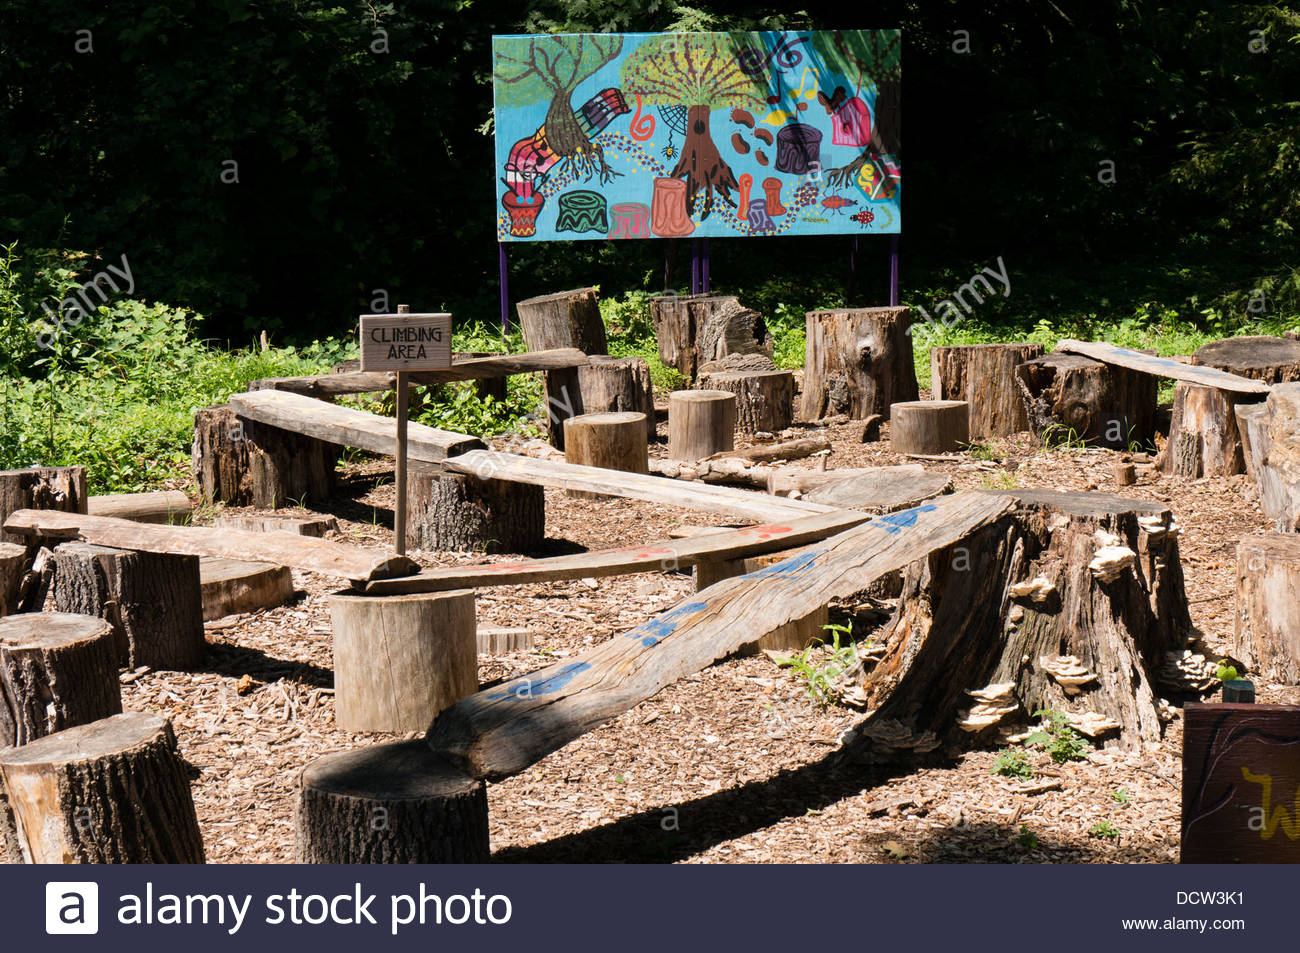 Natural Play Area At The Youth Garden At The National Arboretum In